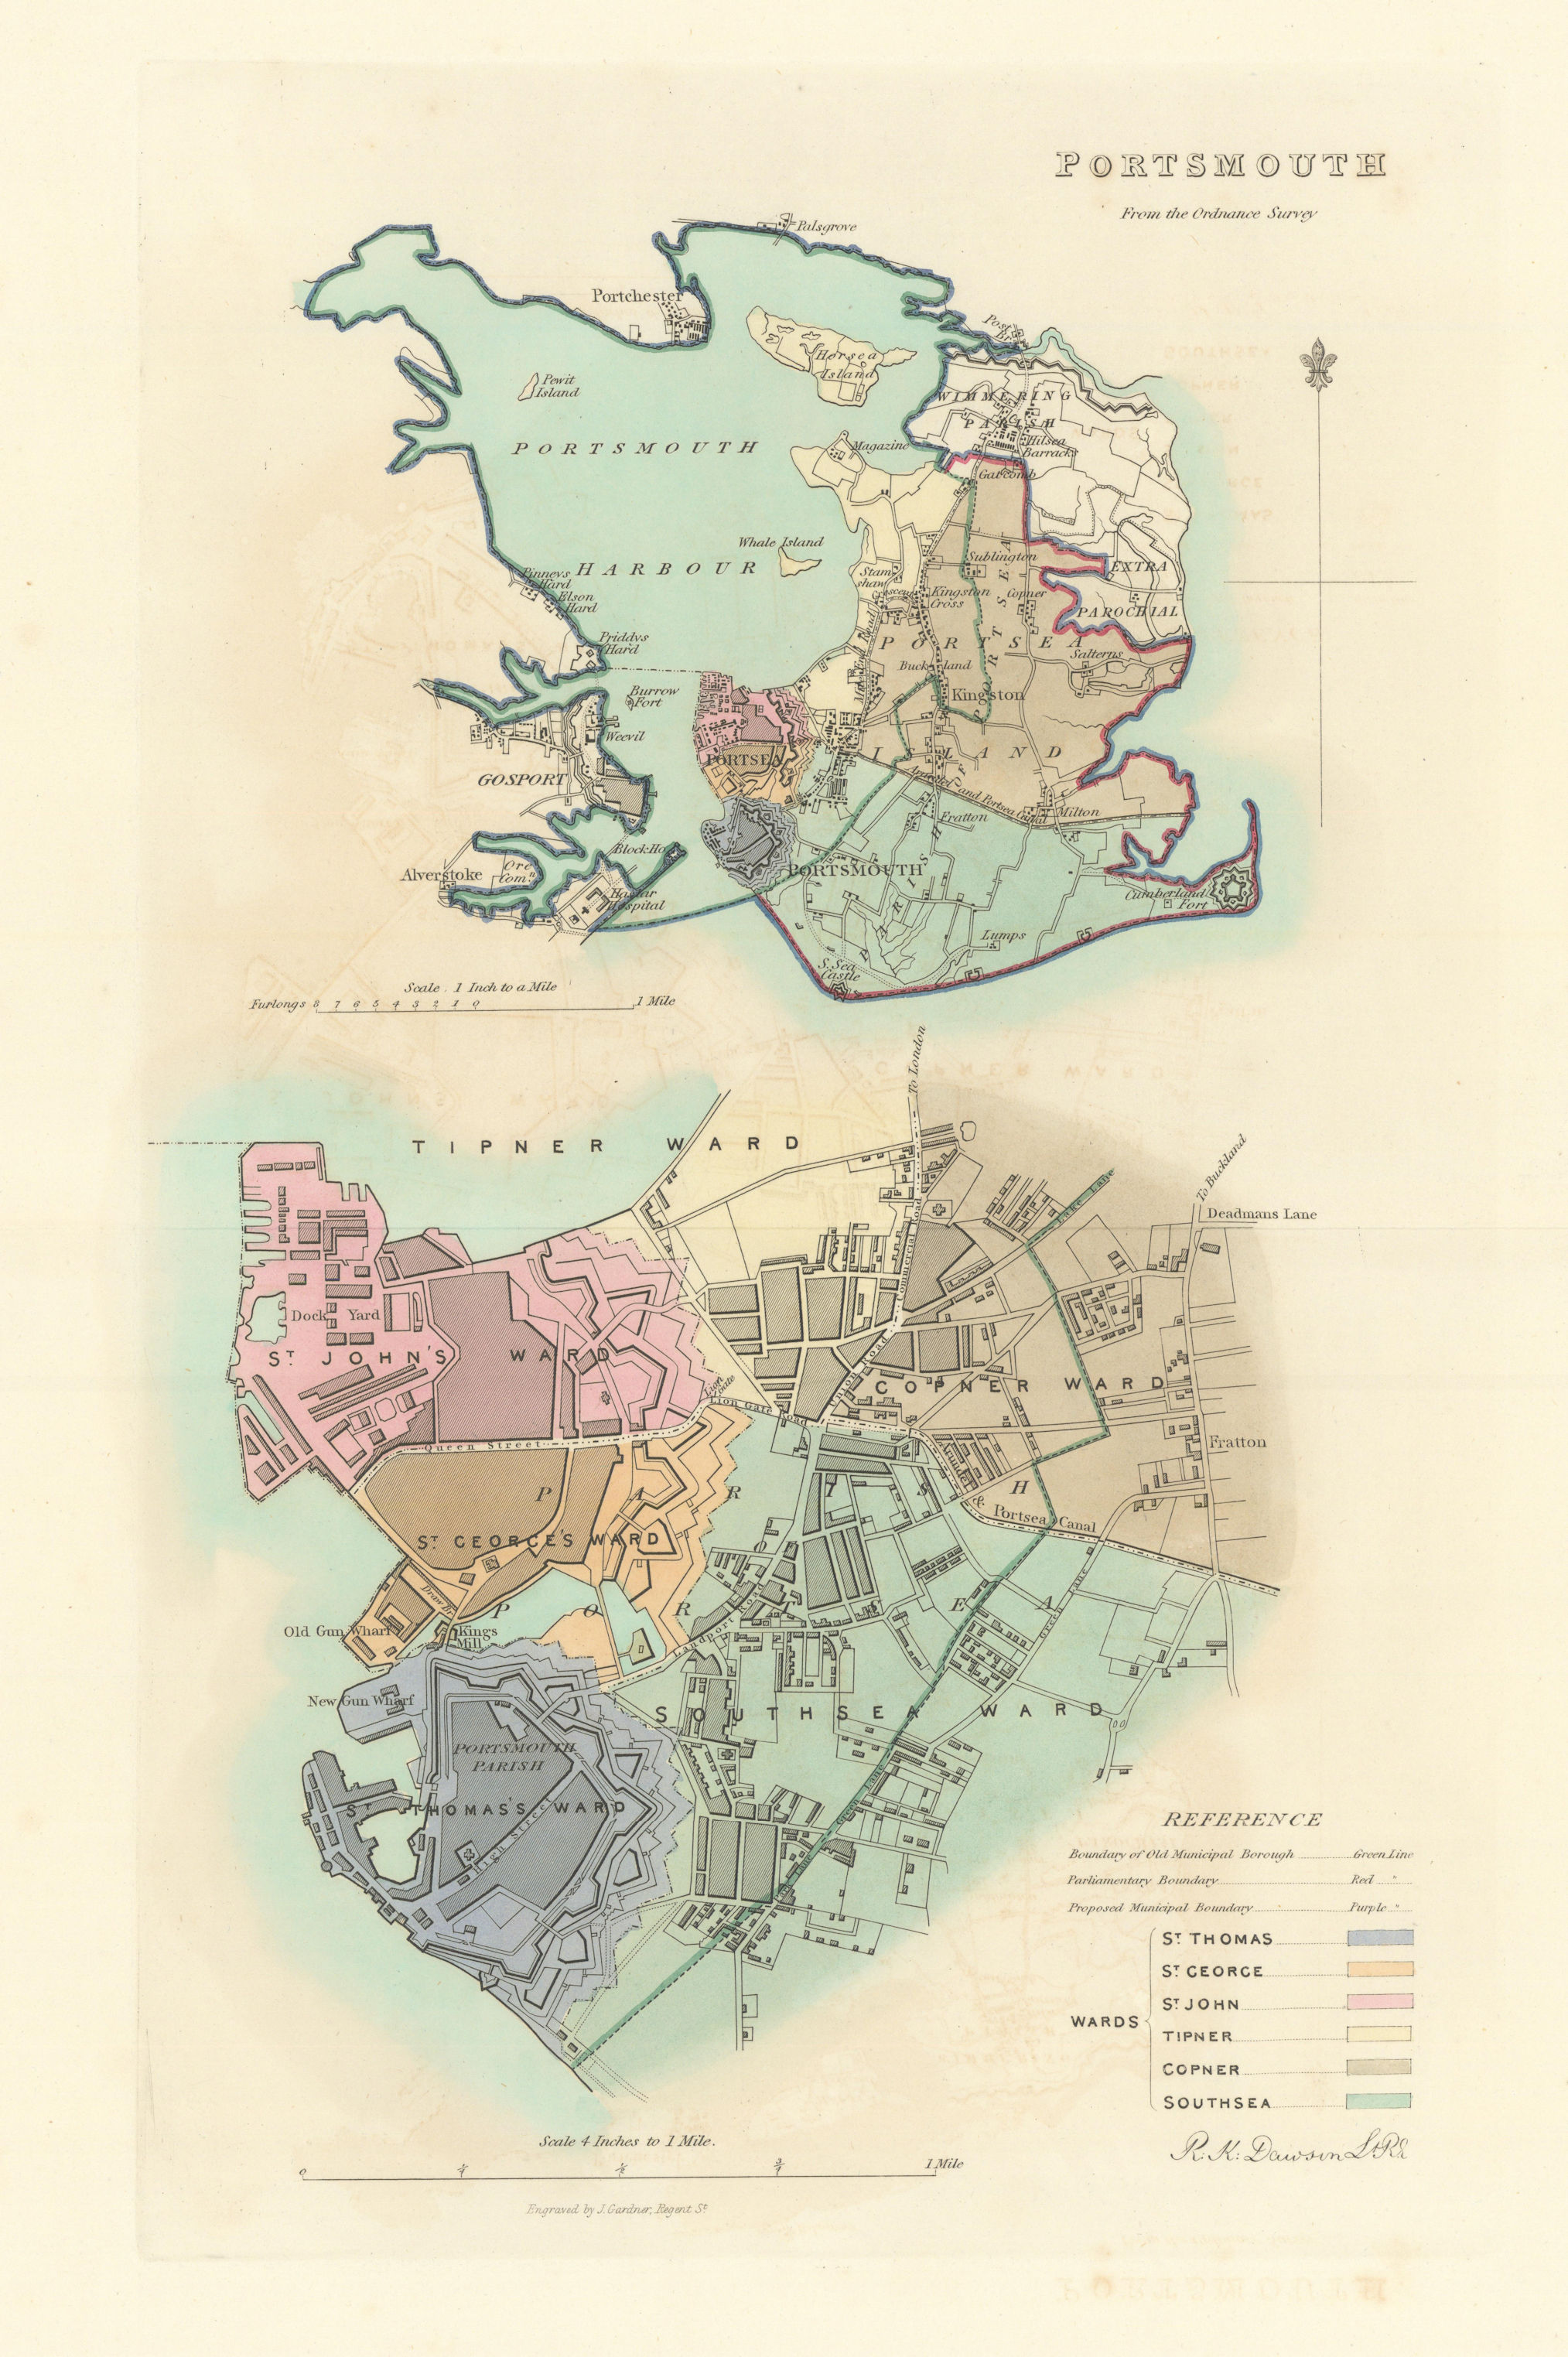 Associate Product PORTSMOUTH borough/town plan. BOUNDARY REVIEW. Hampshire. DAWSON 1837 old map